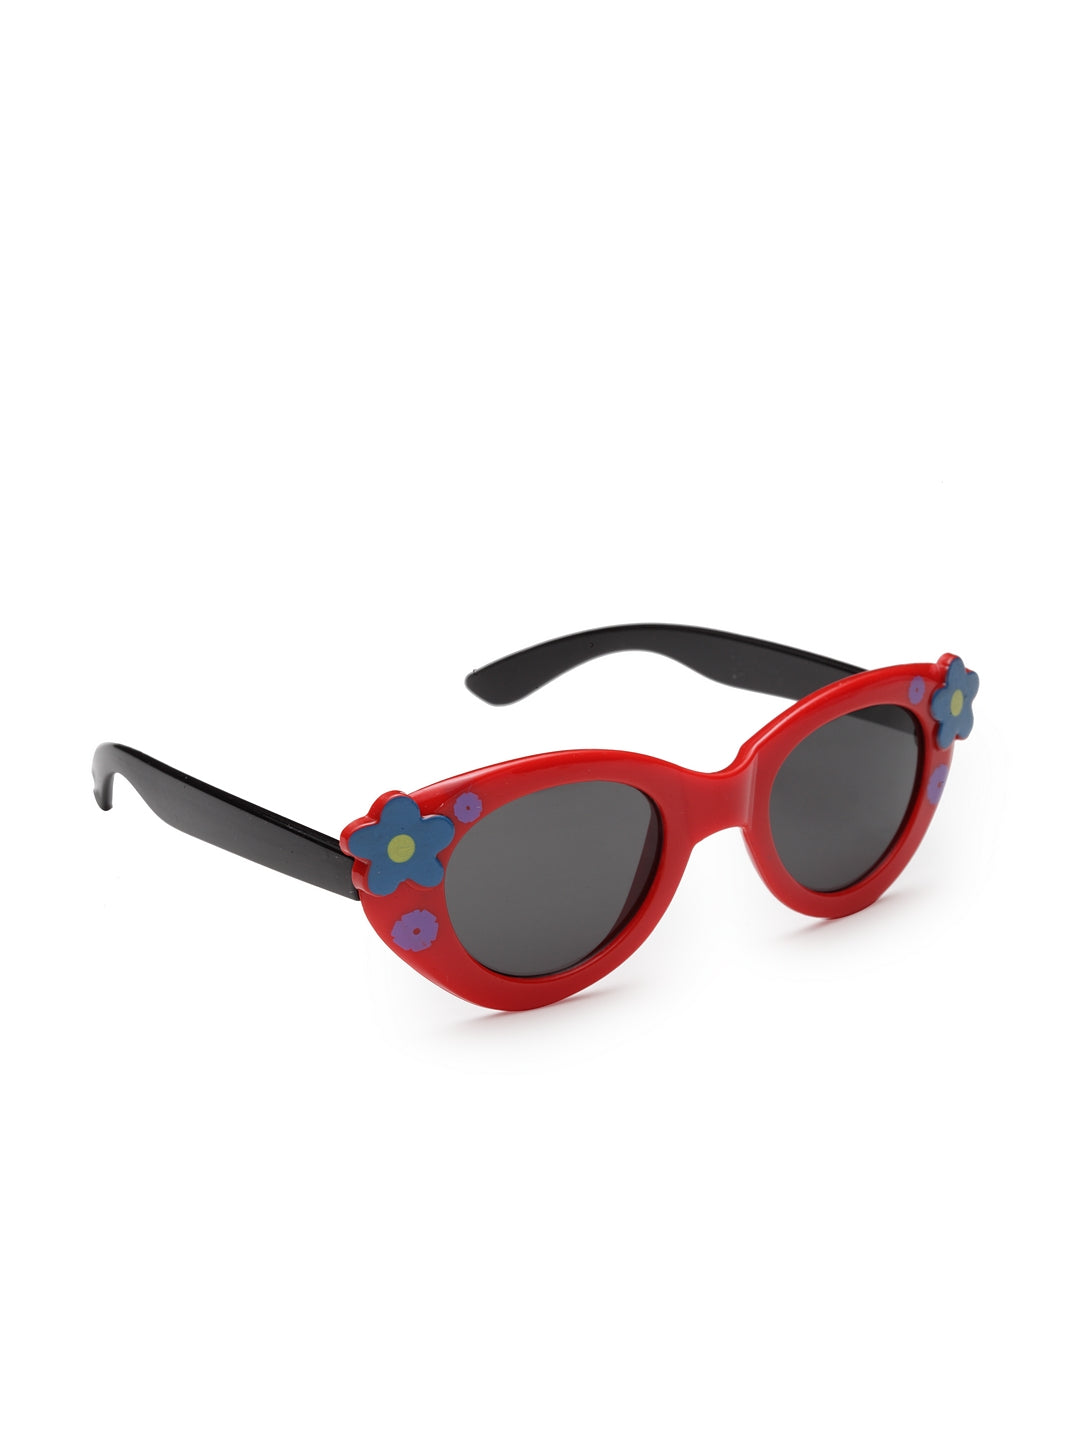 Stol'n Premium Attractive Fashionable UV-Protected Oval shape Sunglasses - Black and Red